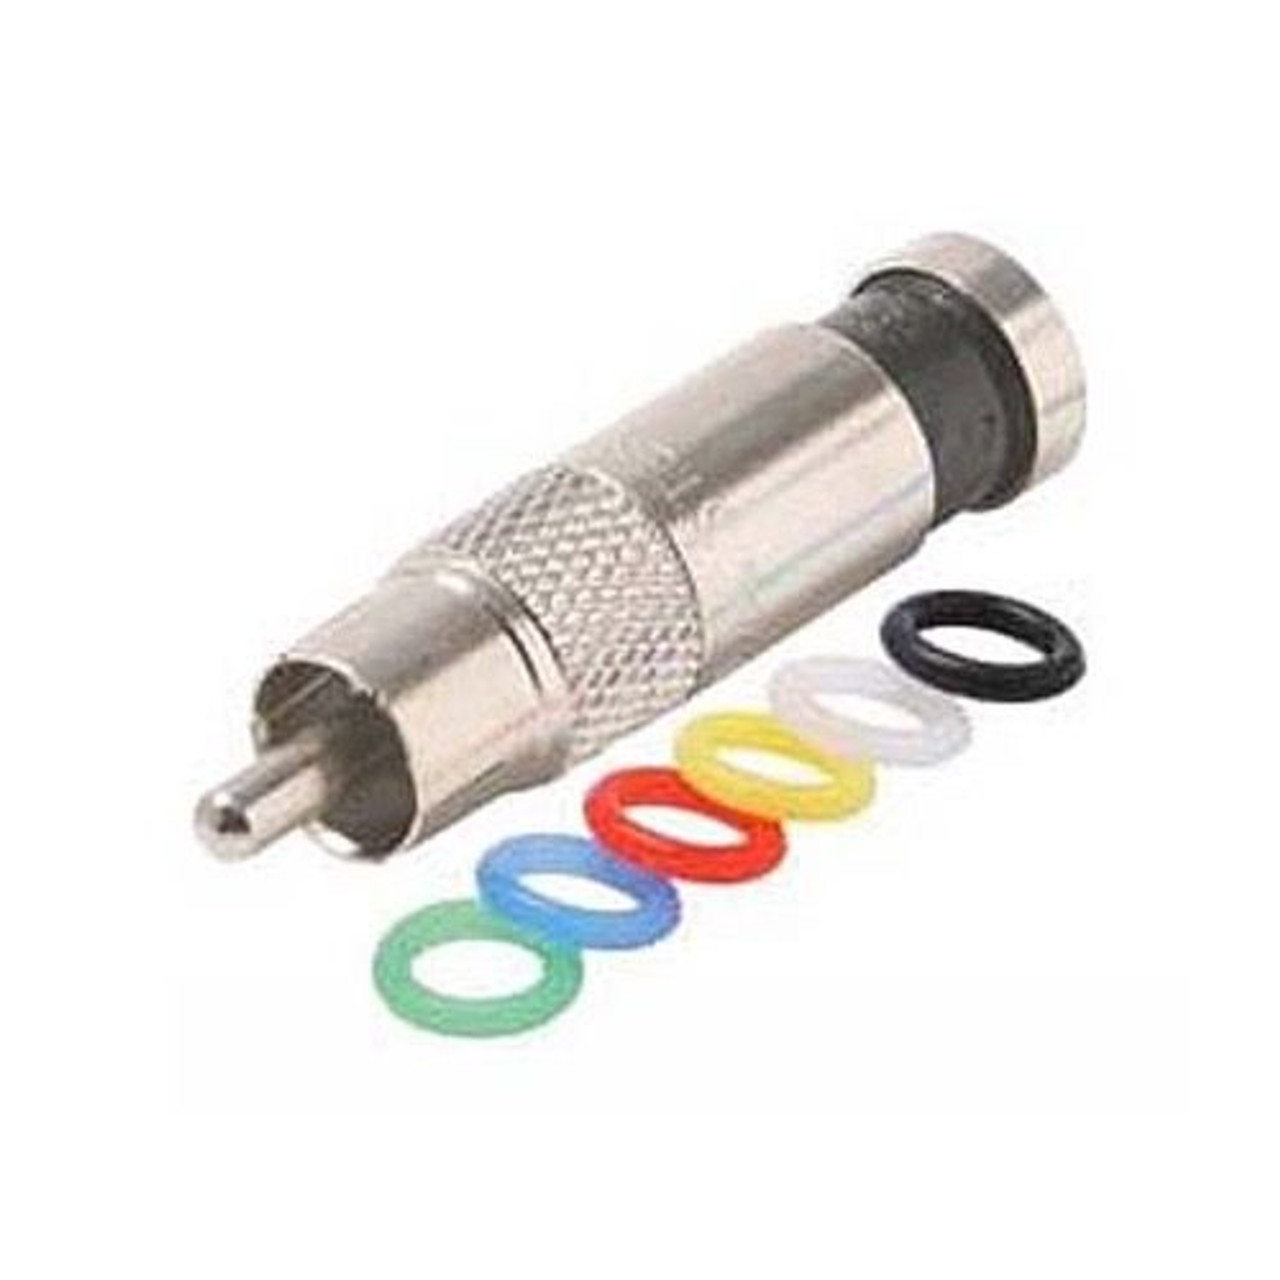 Steren 200-065 RCA Compression Connector RG59 Male Perma-Seal with Multi Color Bands RCA RG59 Coaxial Anti Corrosion Nickel Plated AV Plug RG-59 Signal Component Replacement Plugs, 1 Pack, Part # 200065